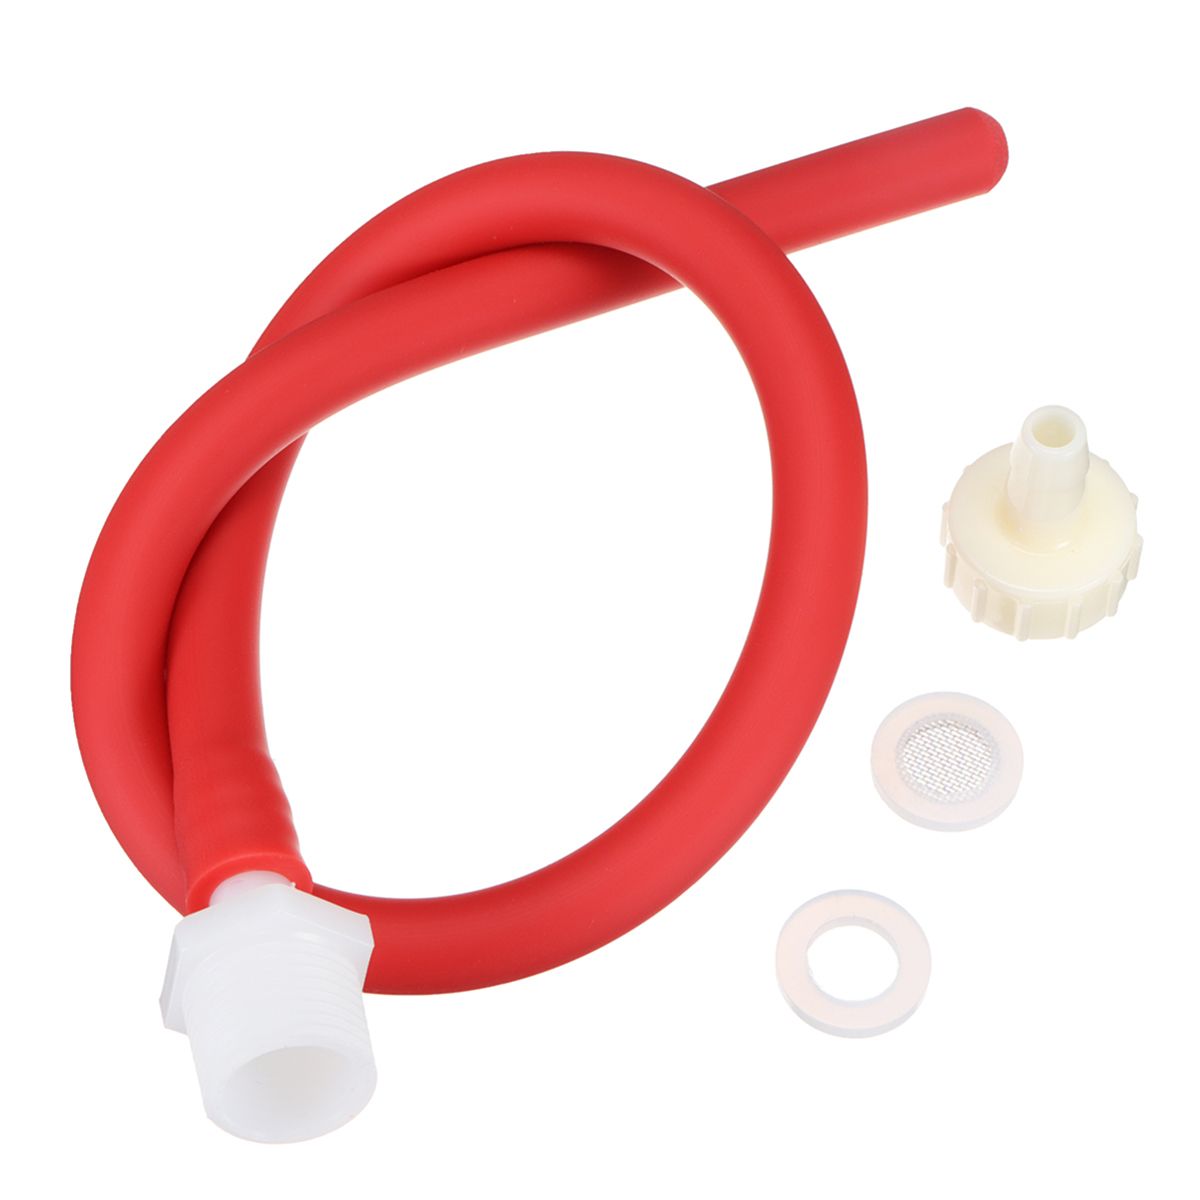 50100150cm-Long-Soft-Silicone-Comfort-Nozzle-Enema-Attachment-Tube-Pipe-Cleansing-Kit-1331097